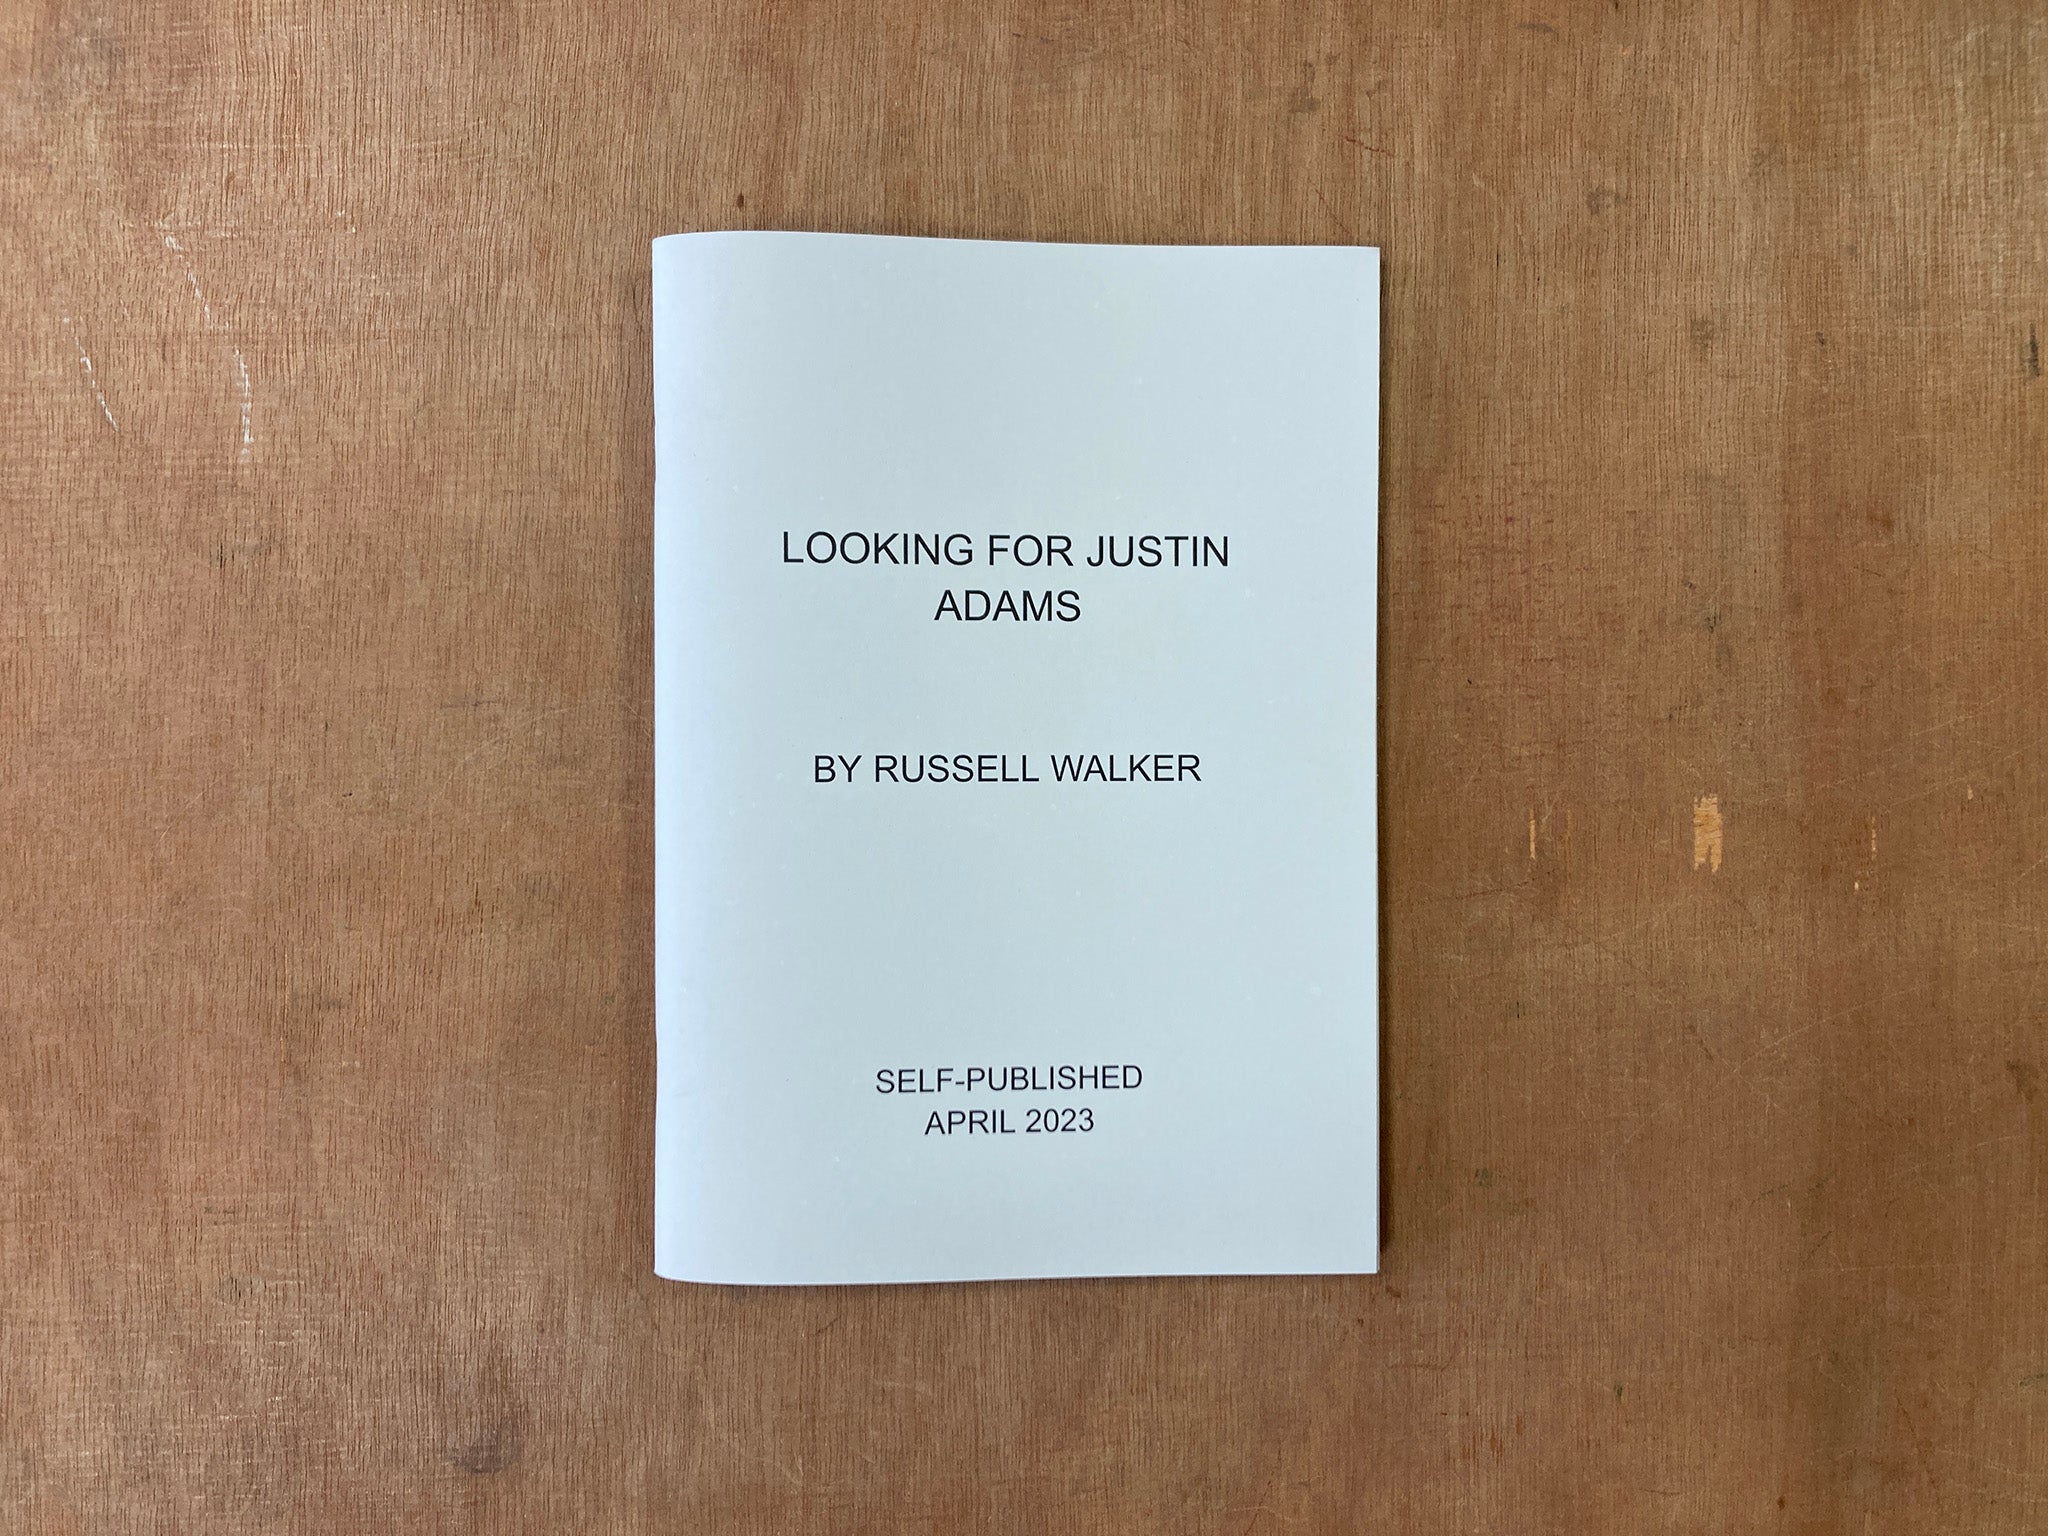 LOOKING FOR JUSTIN ADAMS by Russell Walker